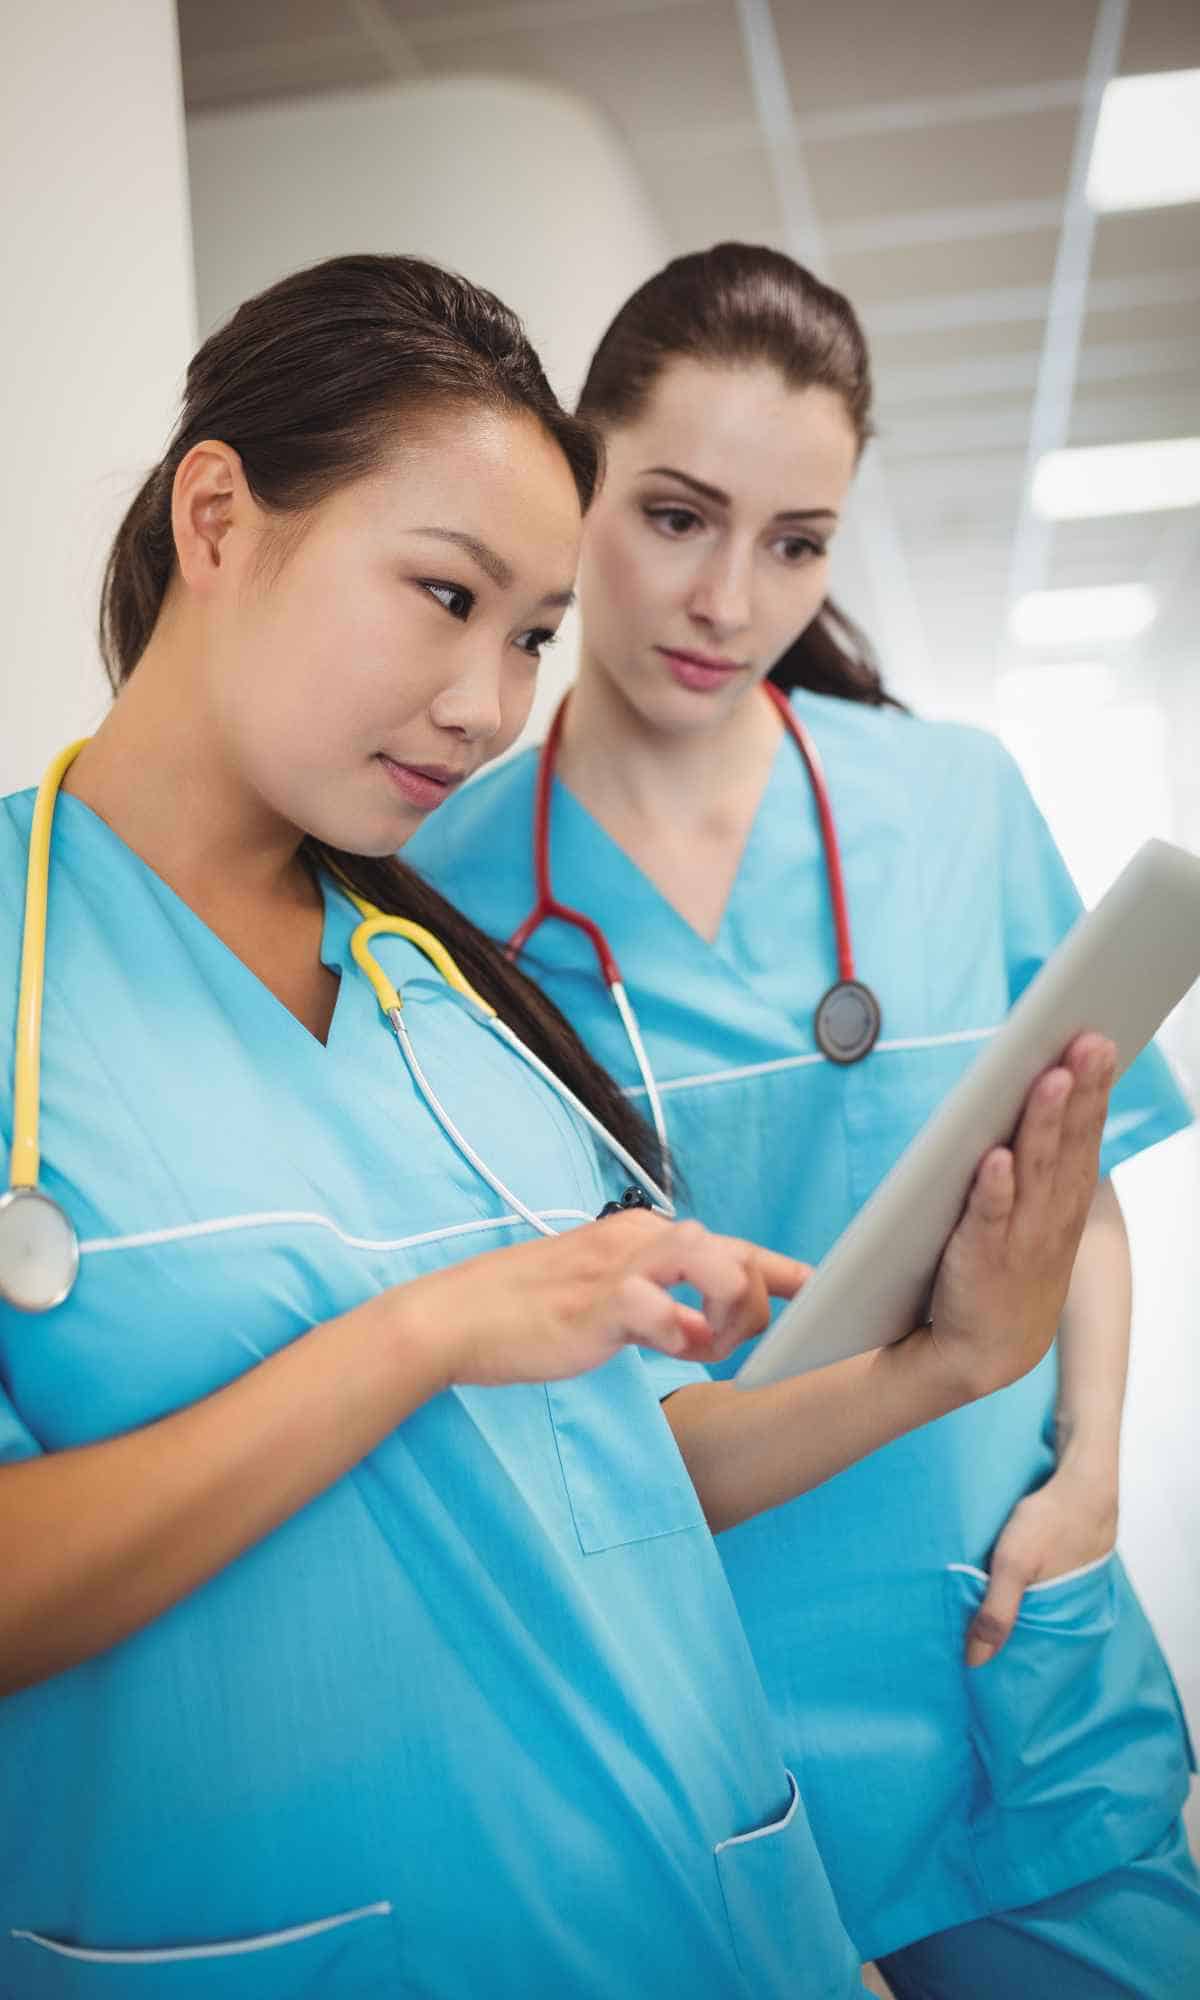 labor and delivery nurses looking at expectant mom's file